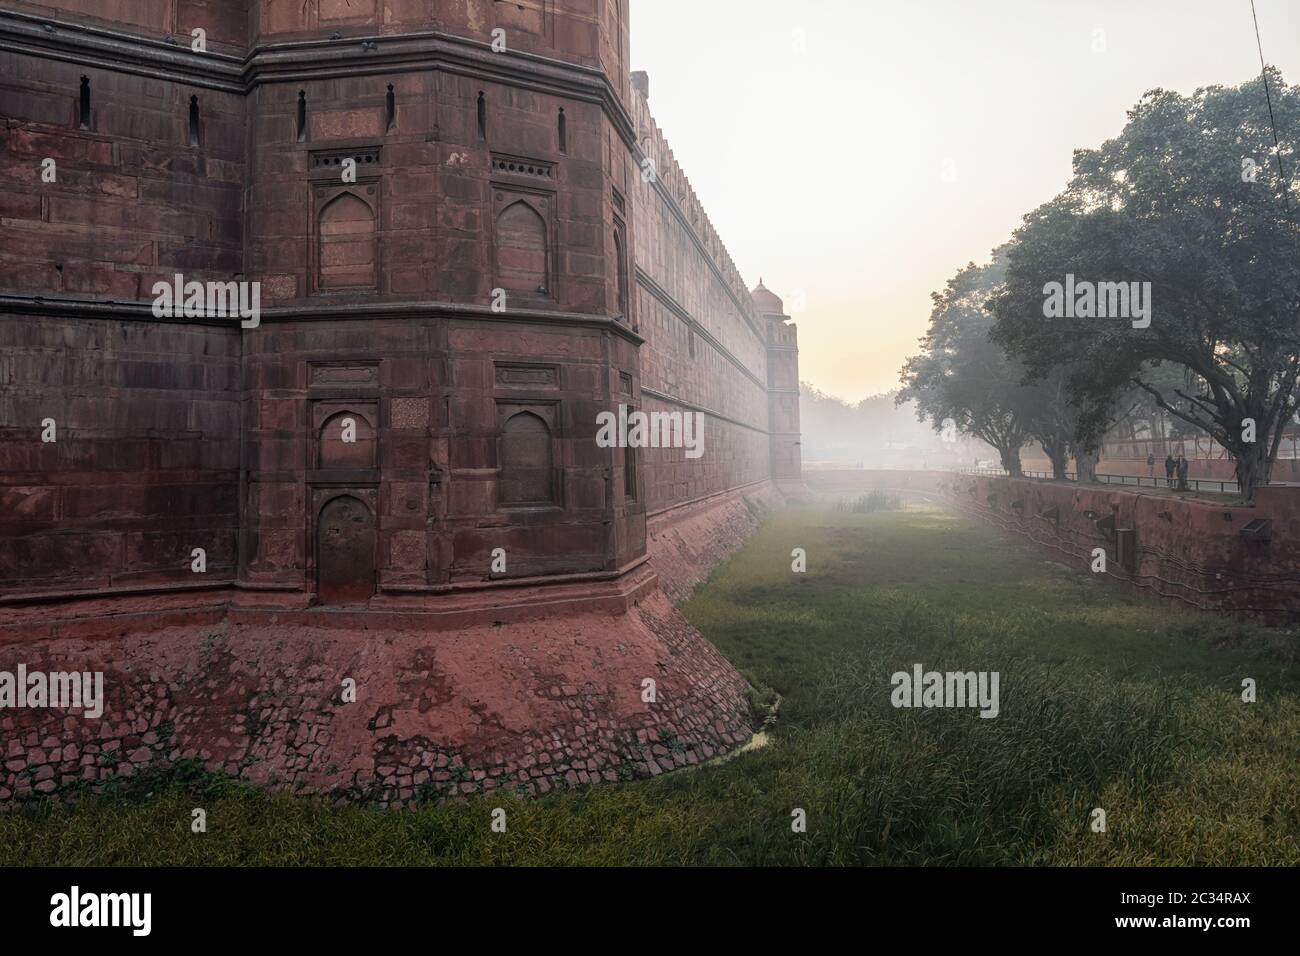 red fort fortress wall Stock Photo